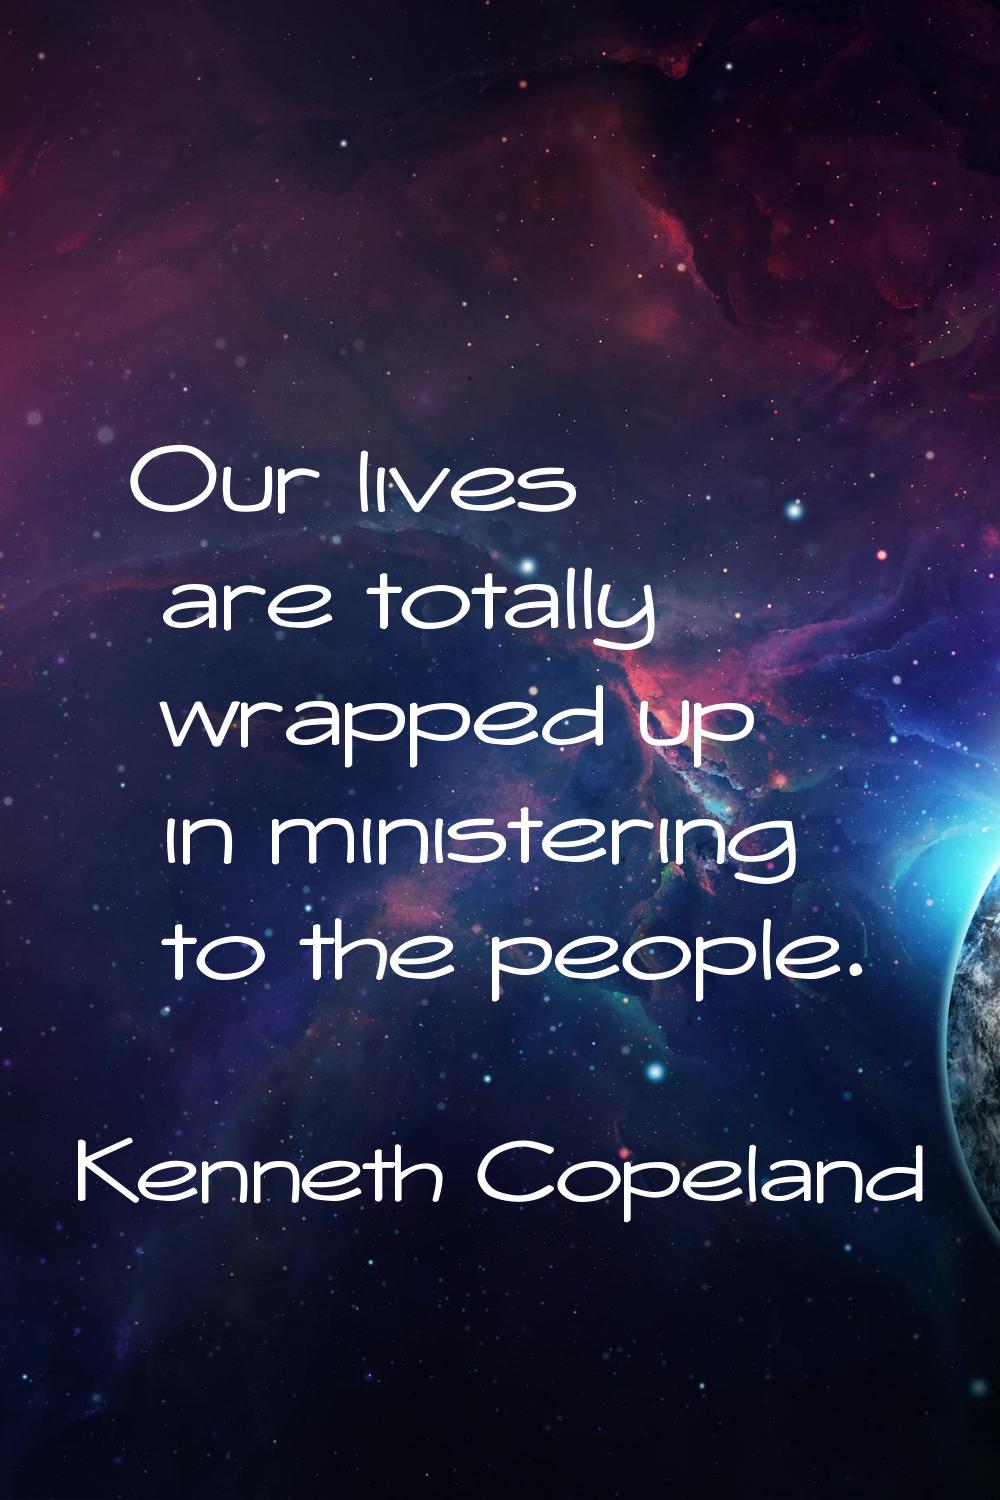 Our lives are totally wrapped up in ministering to the people.